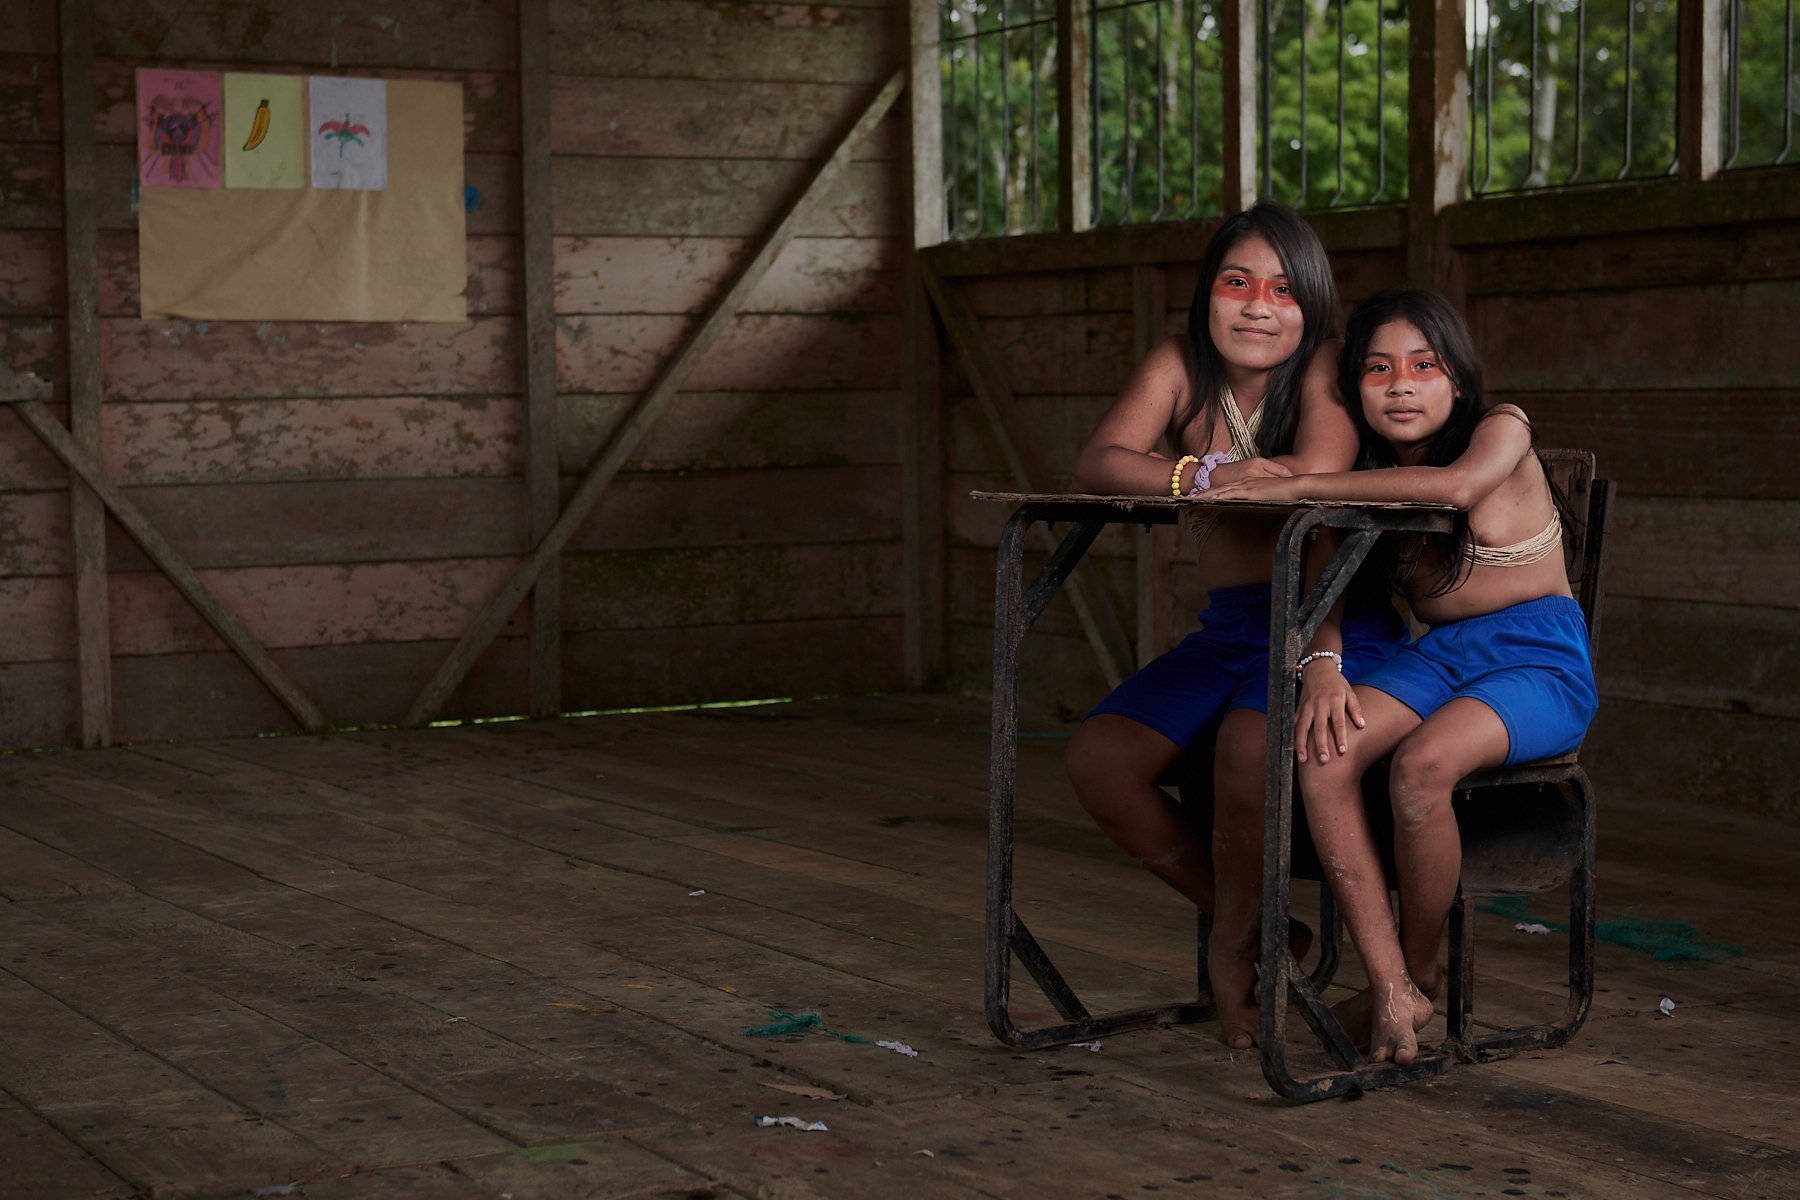 Damaris and Naeli sharing a desk in the old classroom. Thanks to an NGO, they now have new classroom buildings